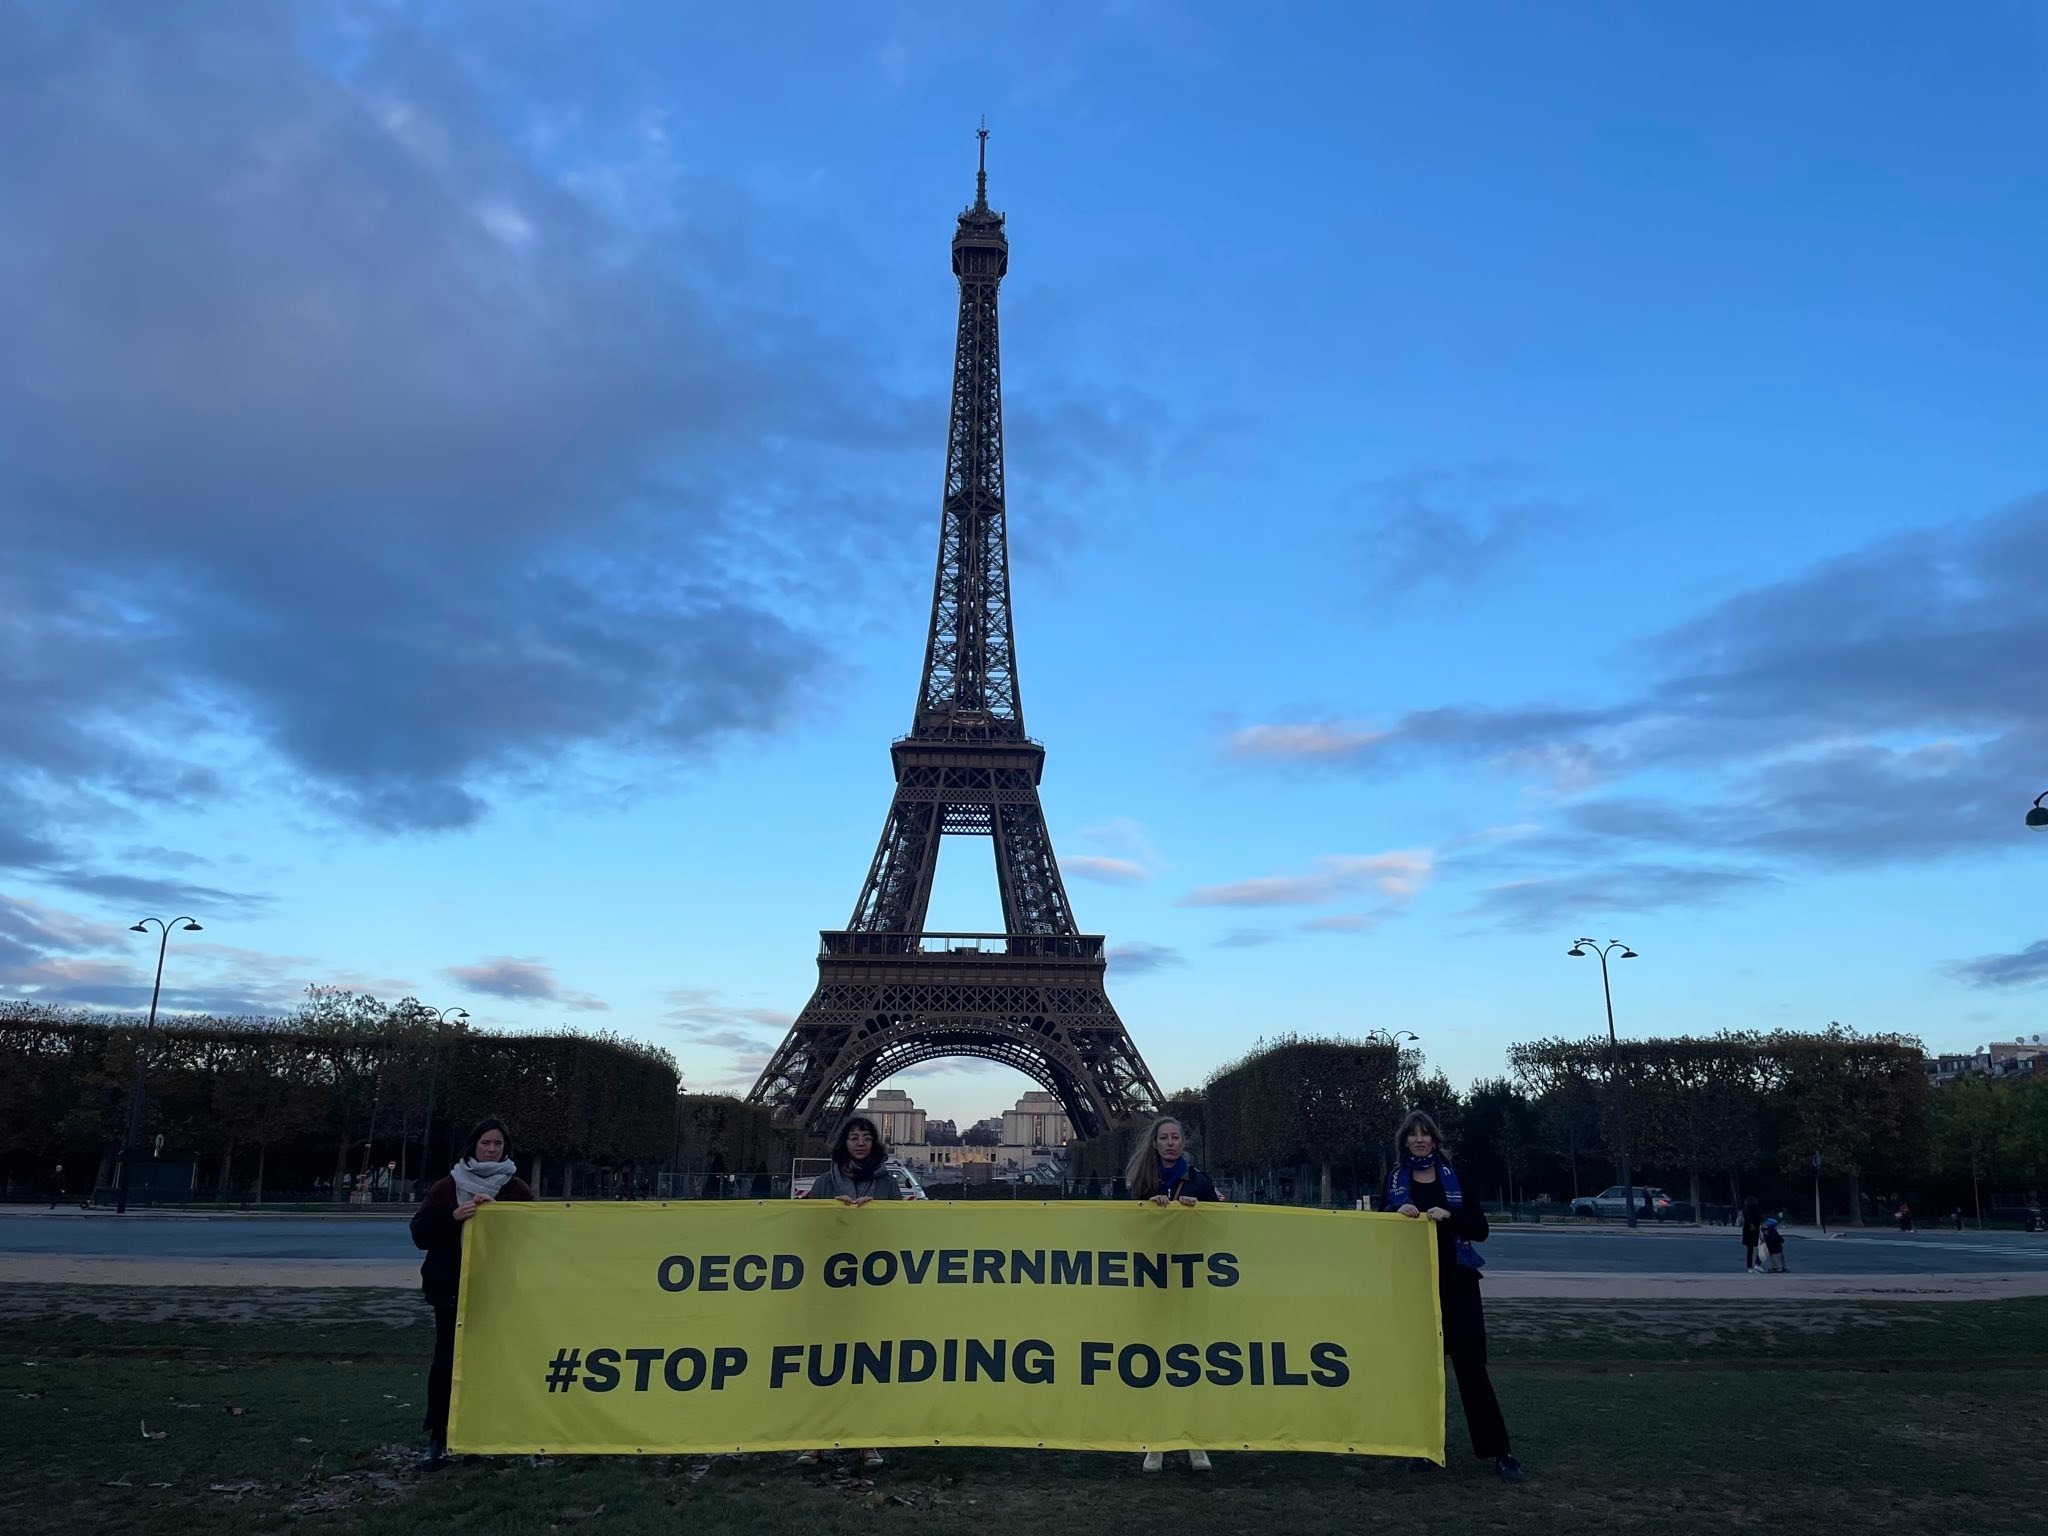 EU, UK, and Canada move to phase out fossil fuel finance at OECD